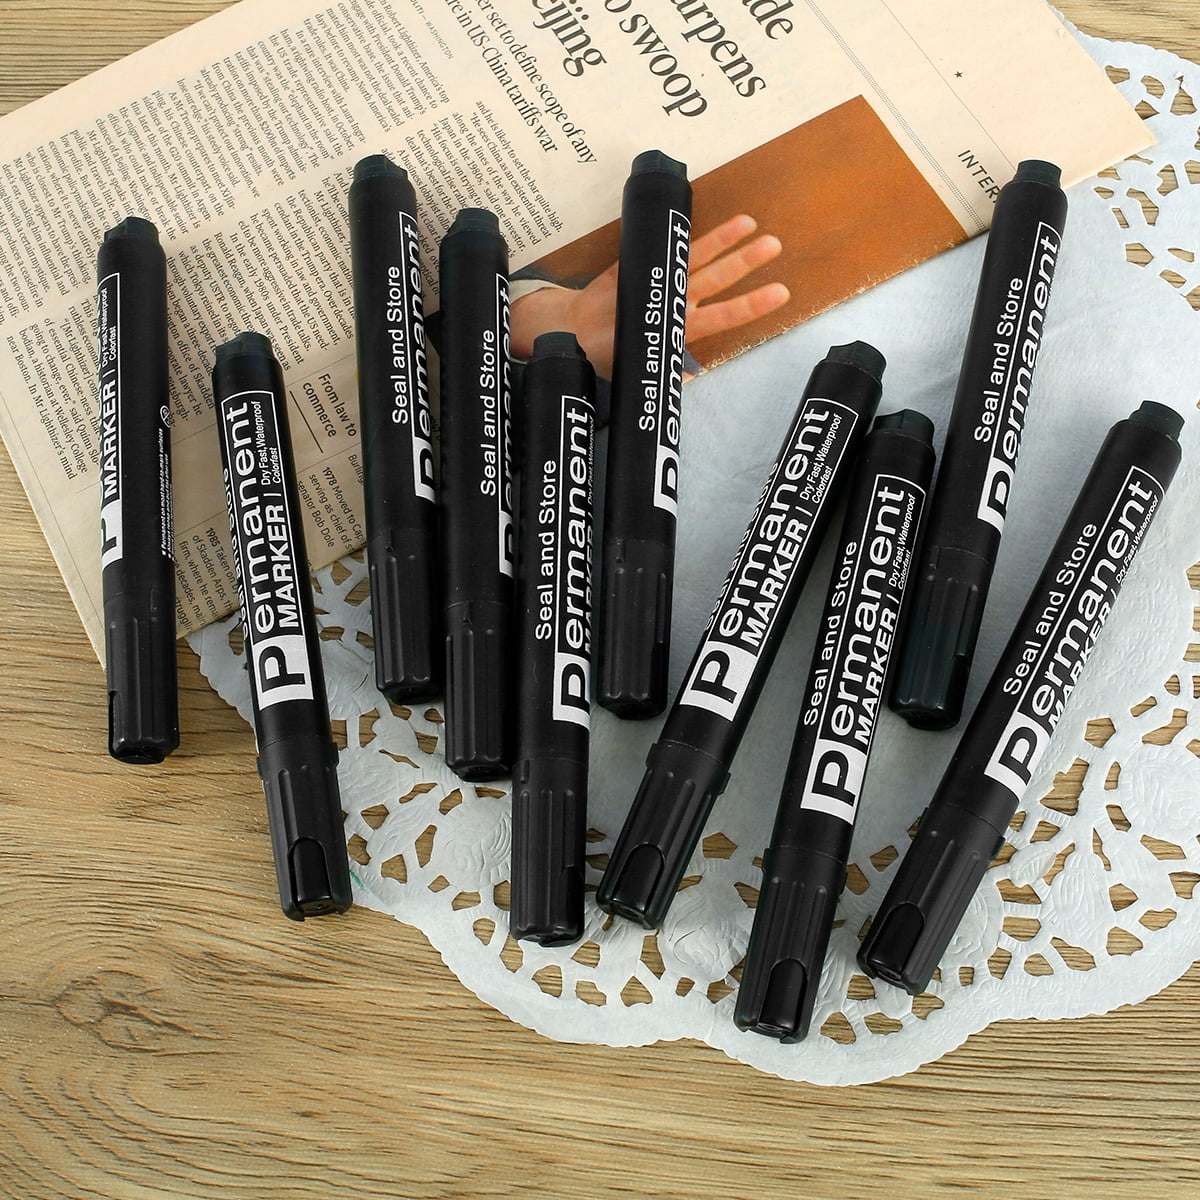 4 X Permanent Marker Pens Black Markers Bullet Tip High Quality Waterproof